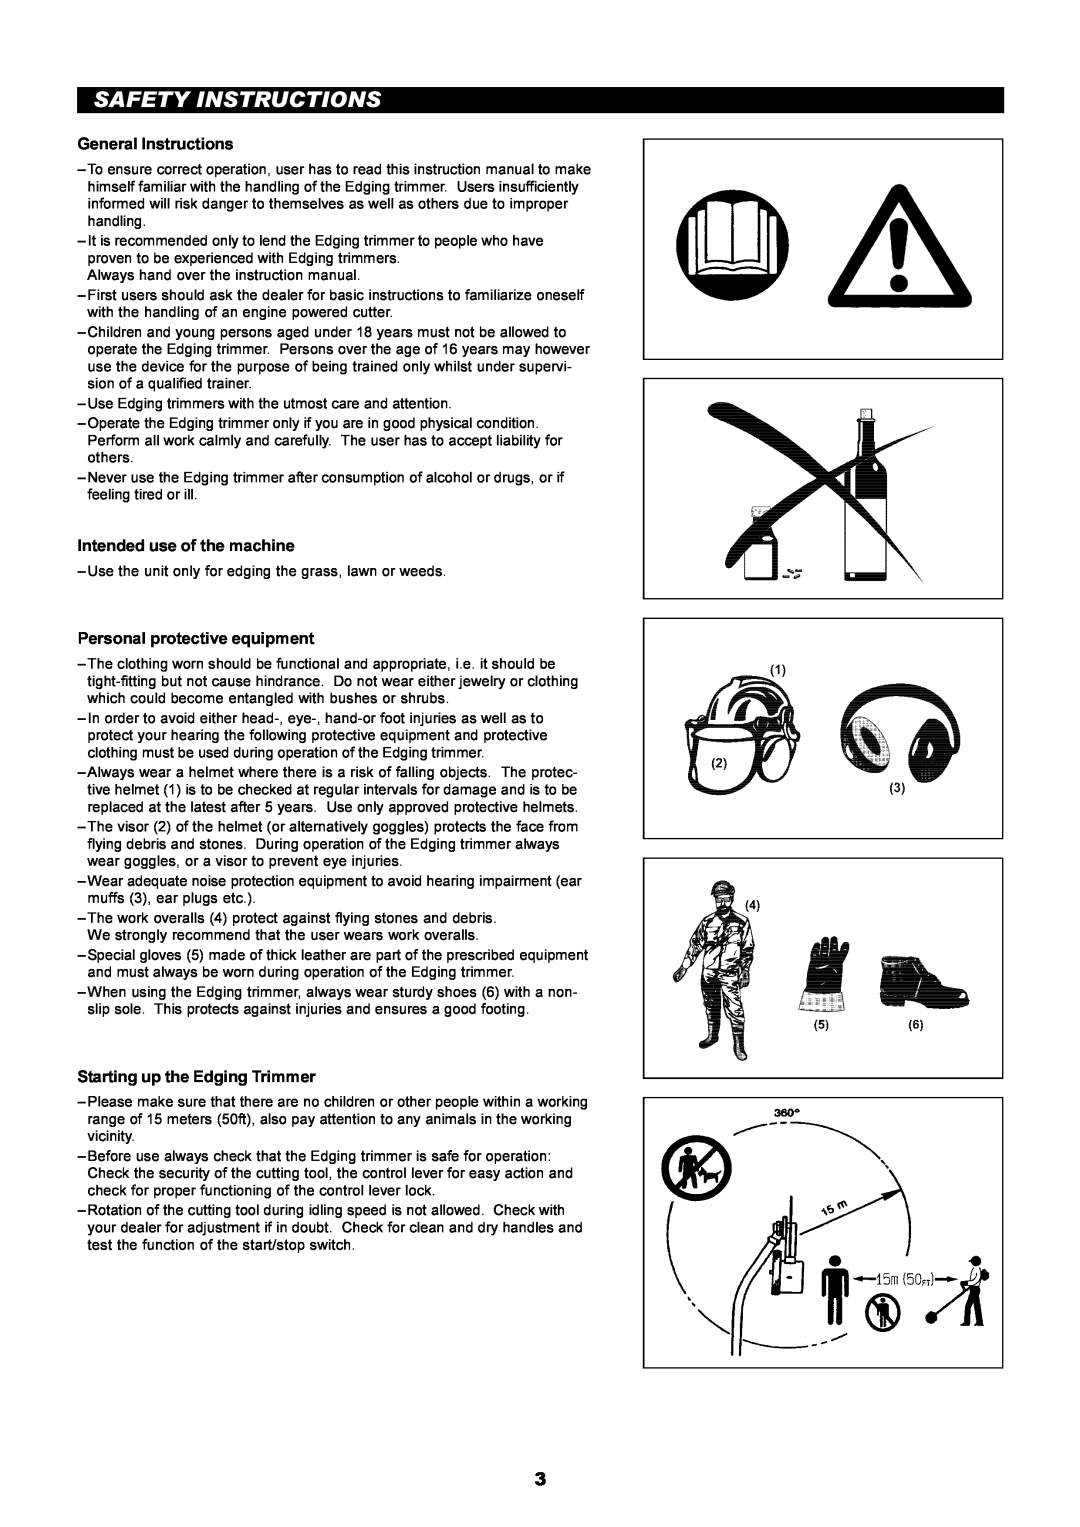 Dolmar PE-251 Safety Instructions, General Instructions, Intended use of the machine, Personal protective equipment 